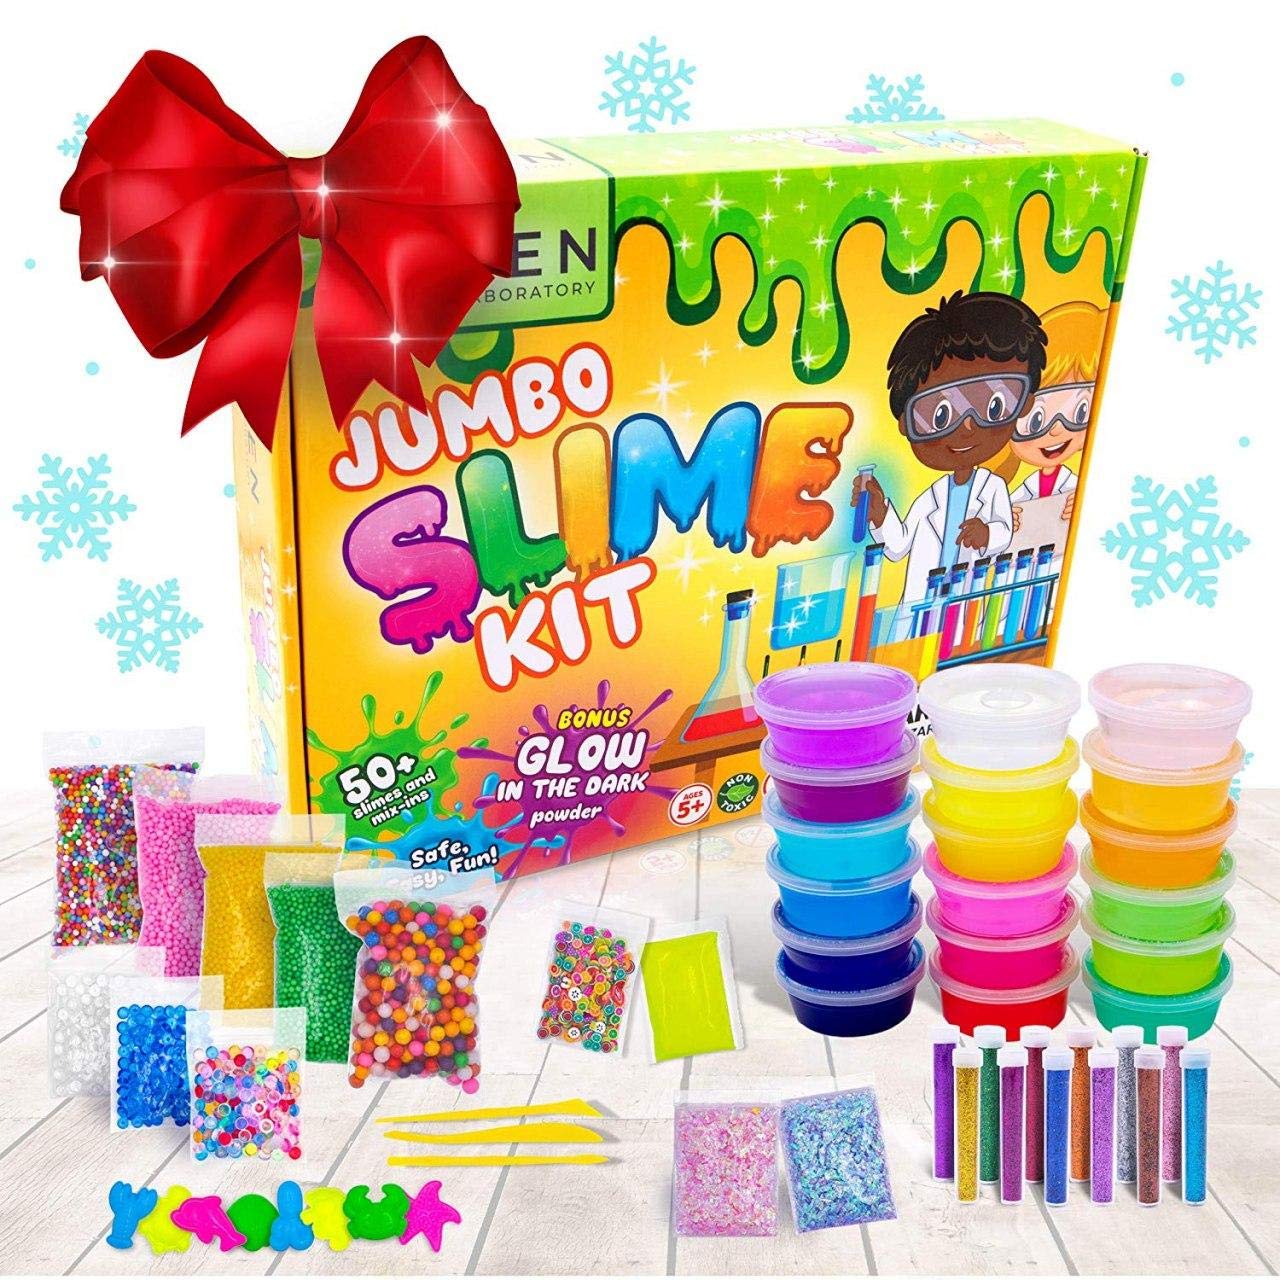 Slime Kit DIY Toy Stocking Stuffer Fidget Gift for Kids Girls Boys Ages 5-12, Glow in Dark Glitter Slime Making Kit - Figit Supplies w Foam Beads Balls, 18 Mystery Box Containers filled Crystal Powder